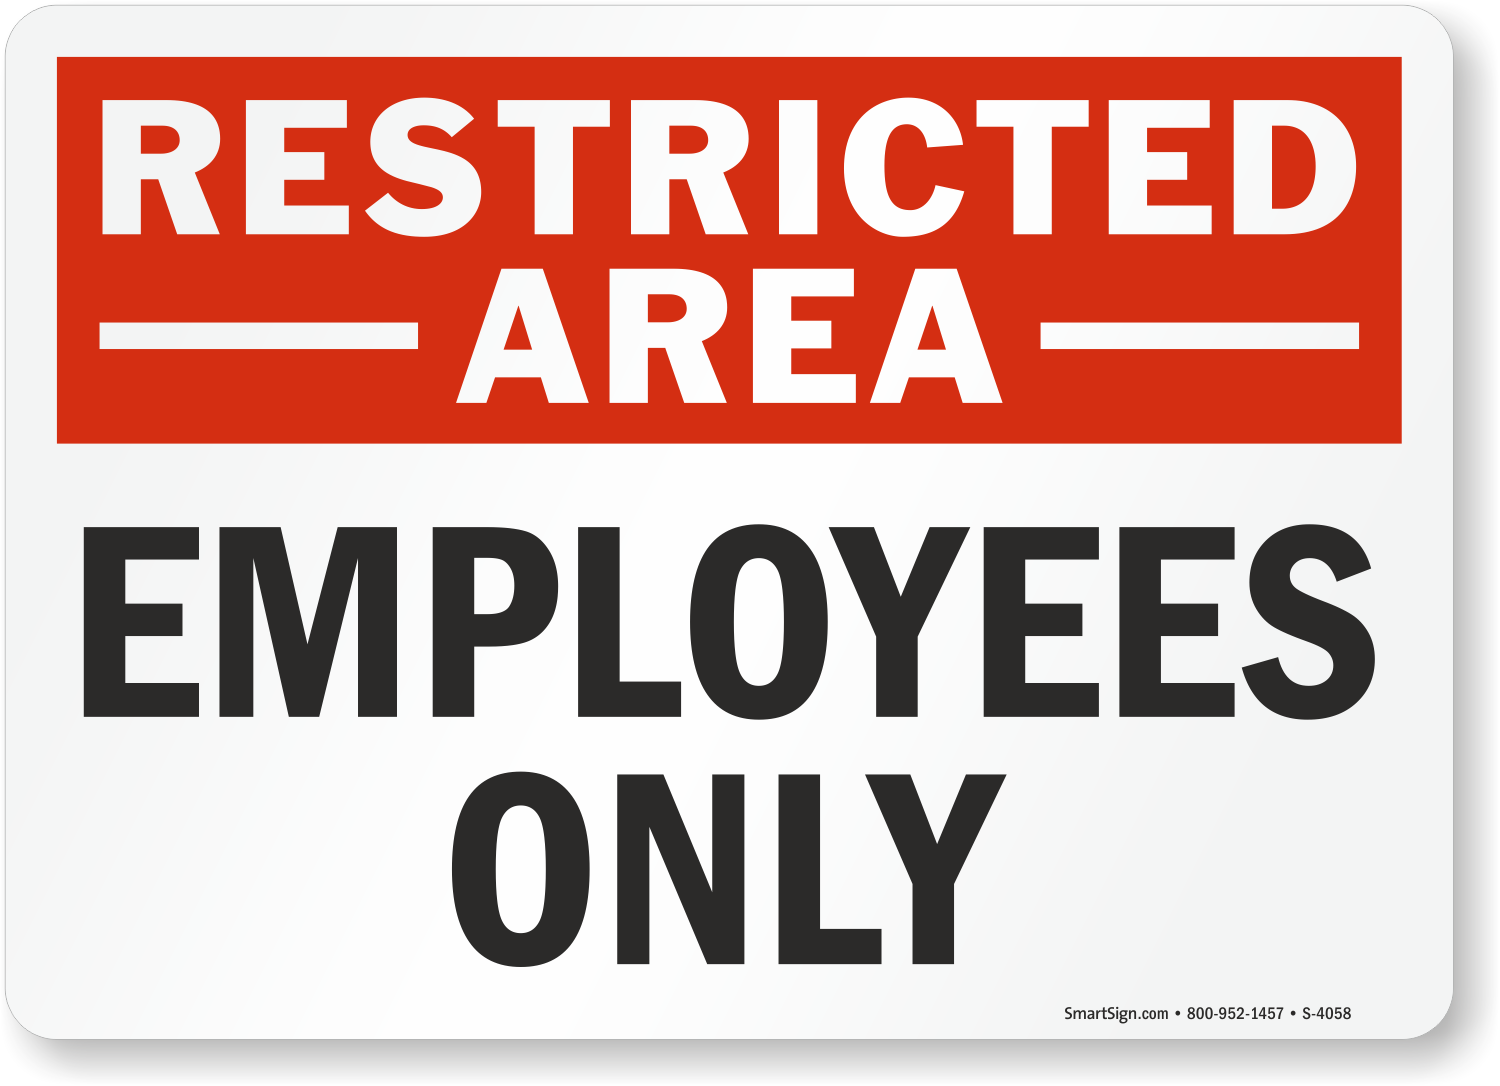 Employees Only Signs For Outdoors